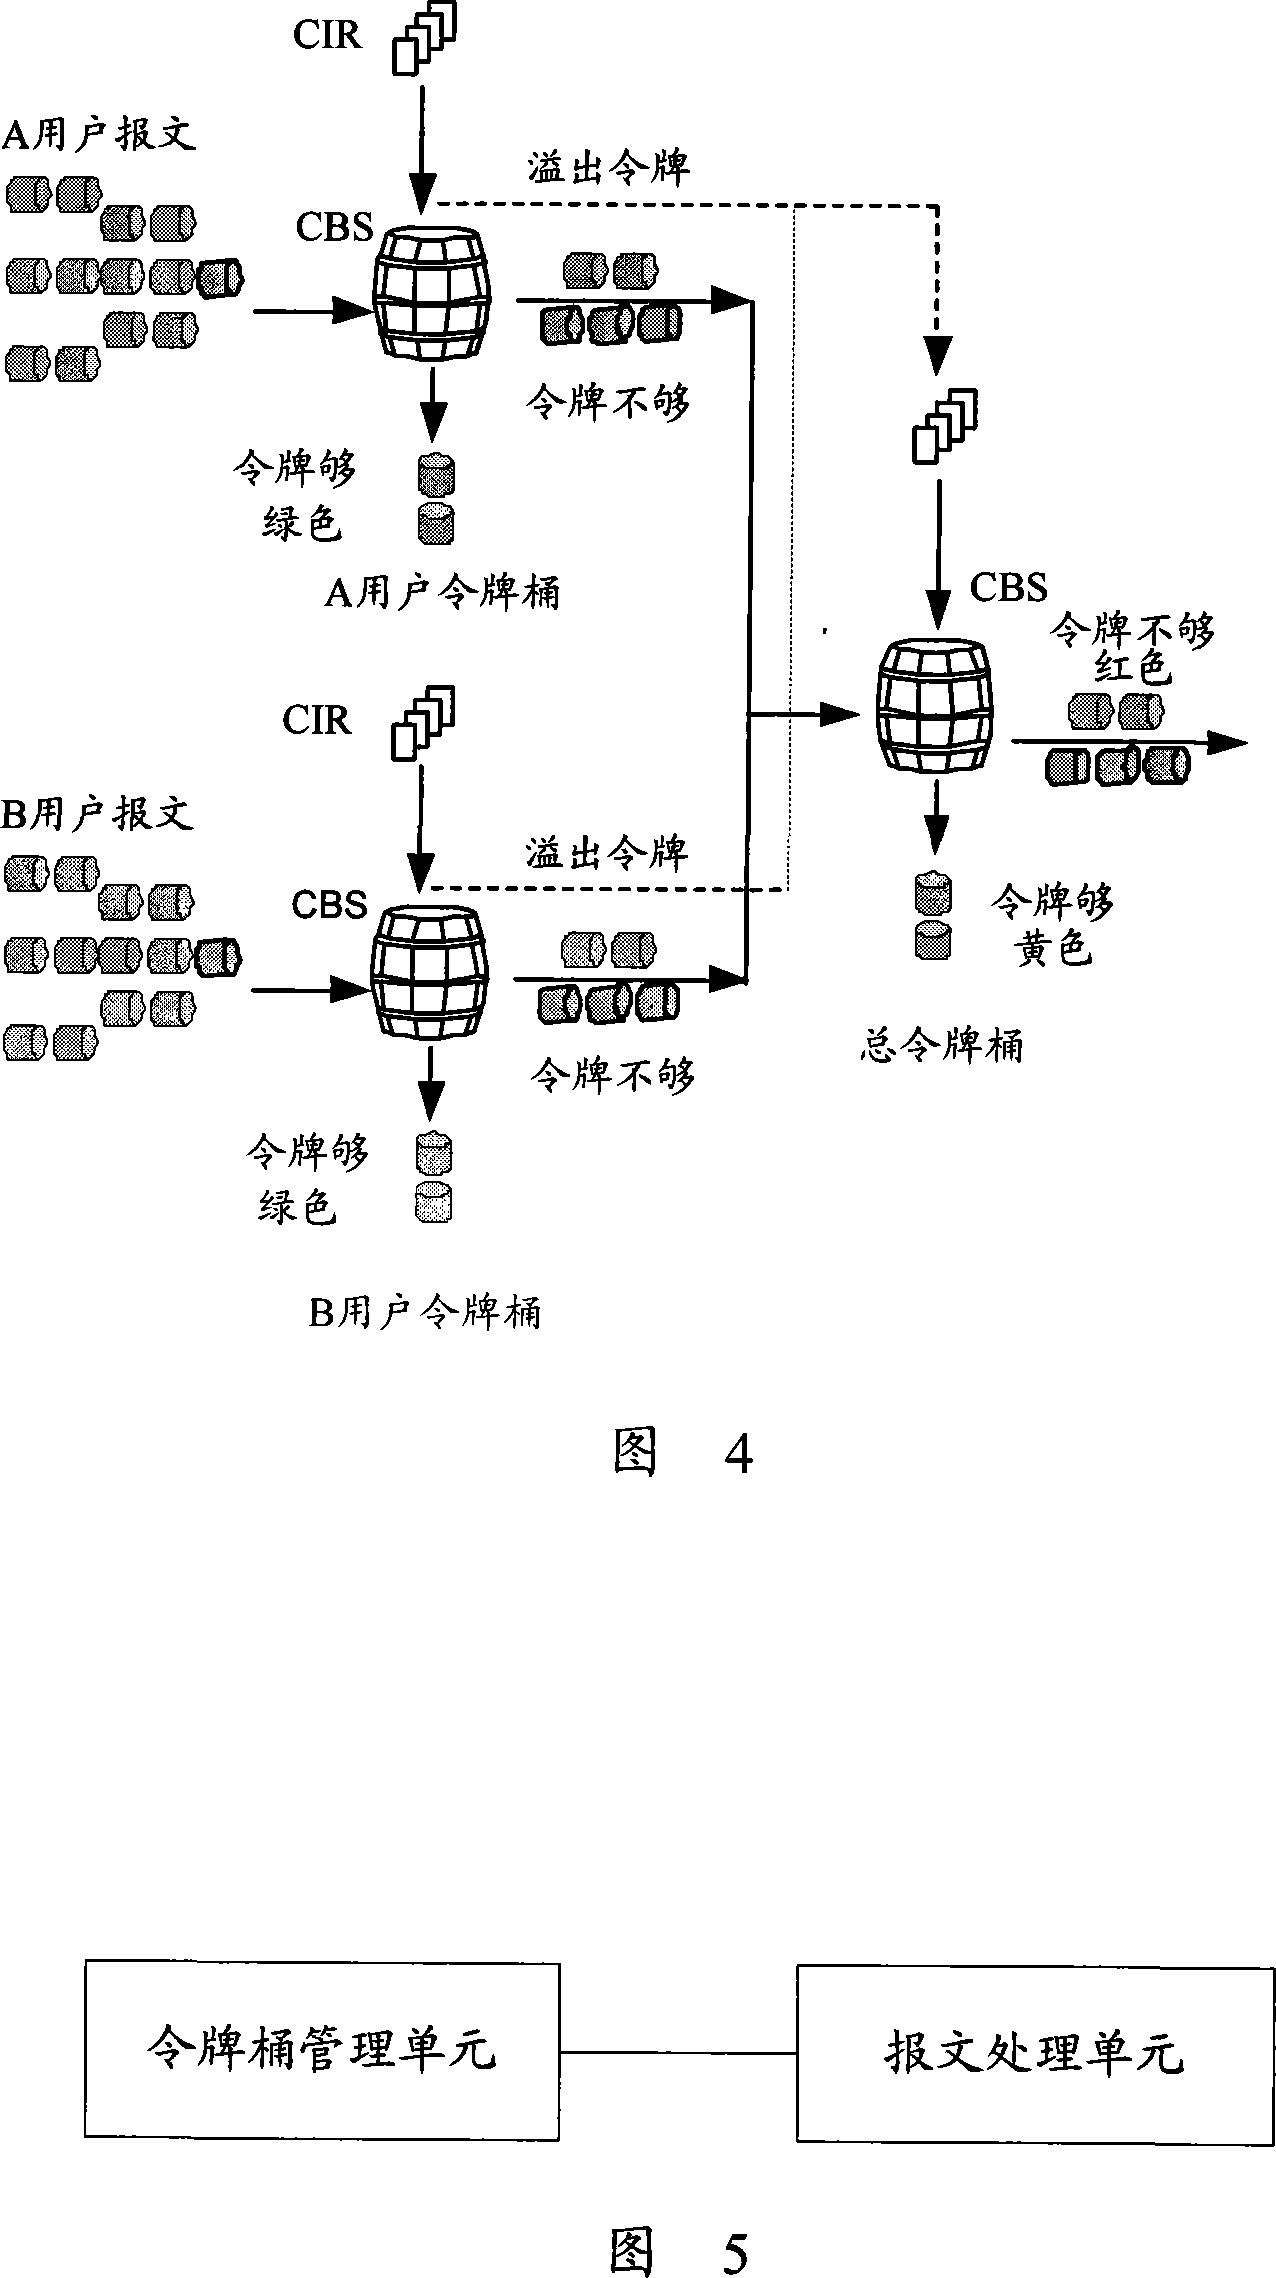 Flow monitoring method and flow monitoring equipment